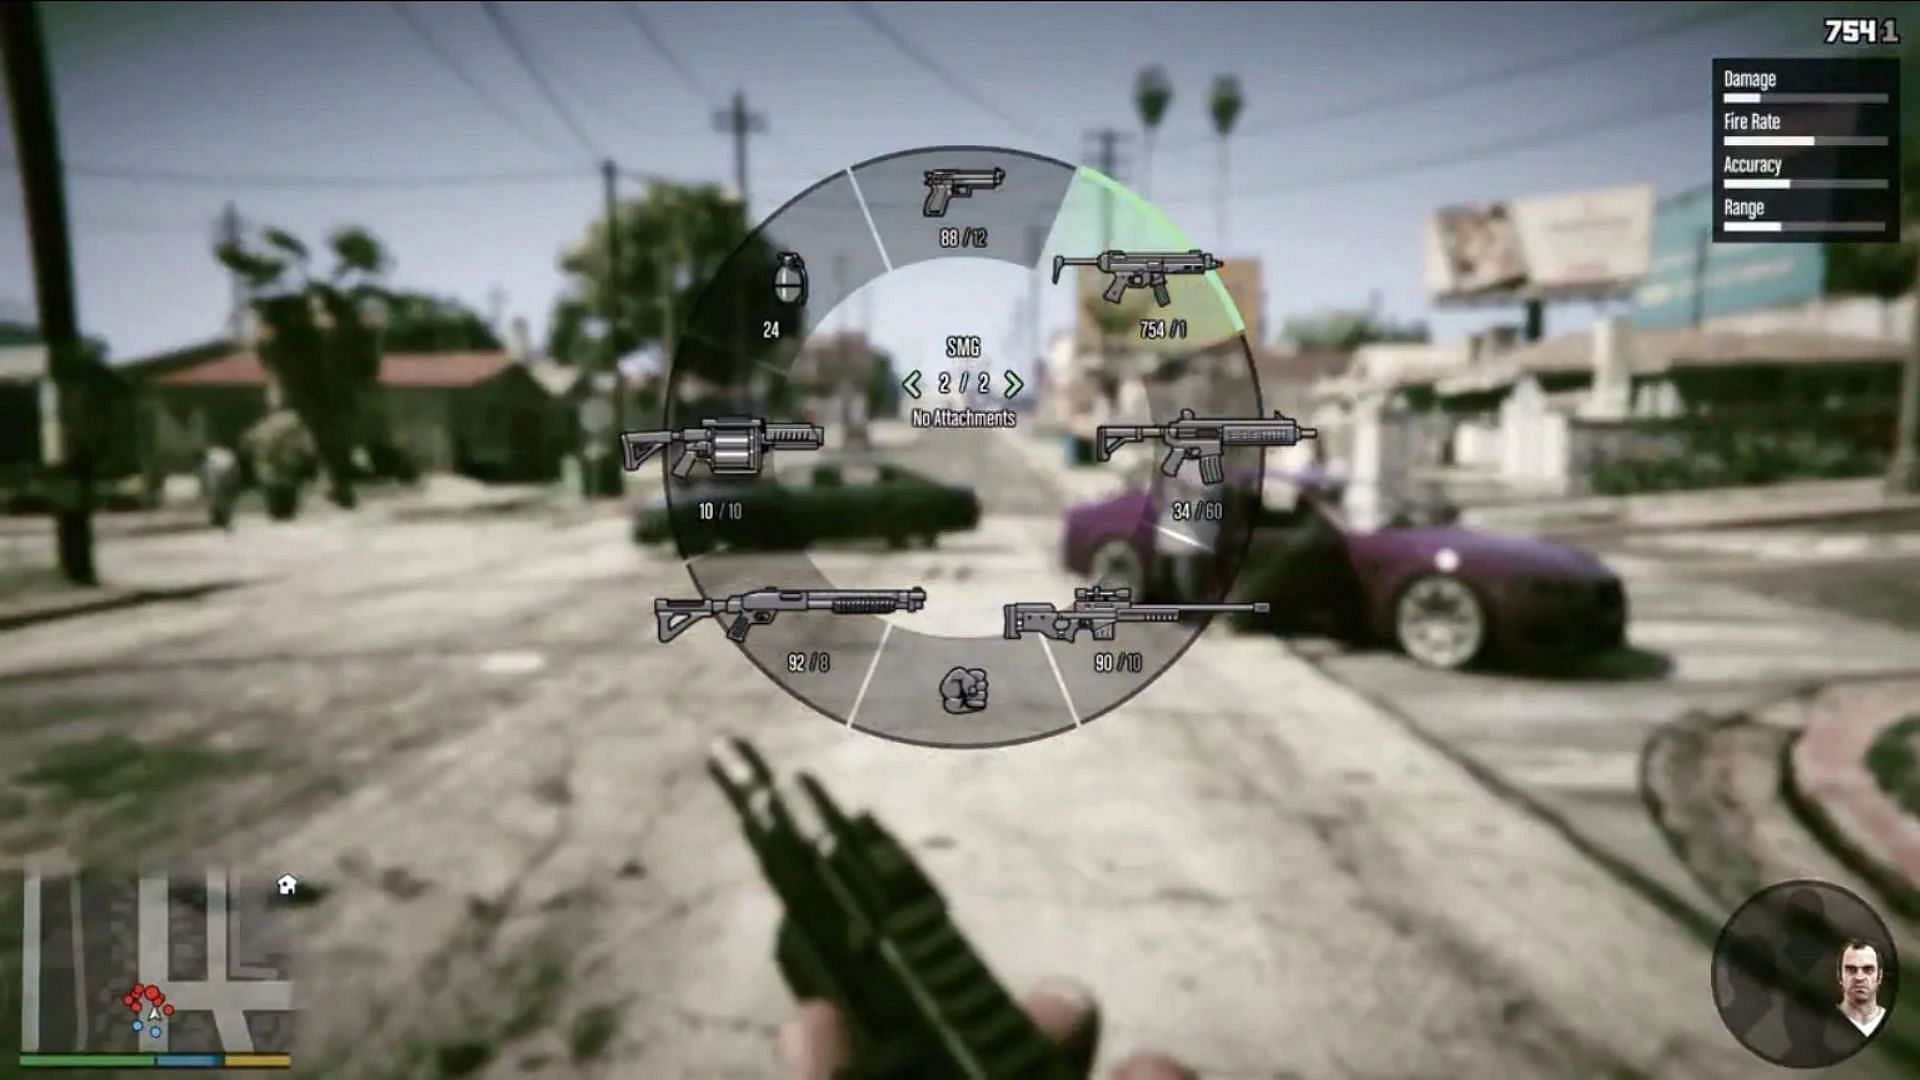 The Grand Theft Auto VI version of the Weapon Wheel looks much bigger than shown in the leaks (Image via Rockstar Games)